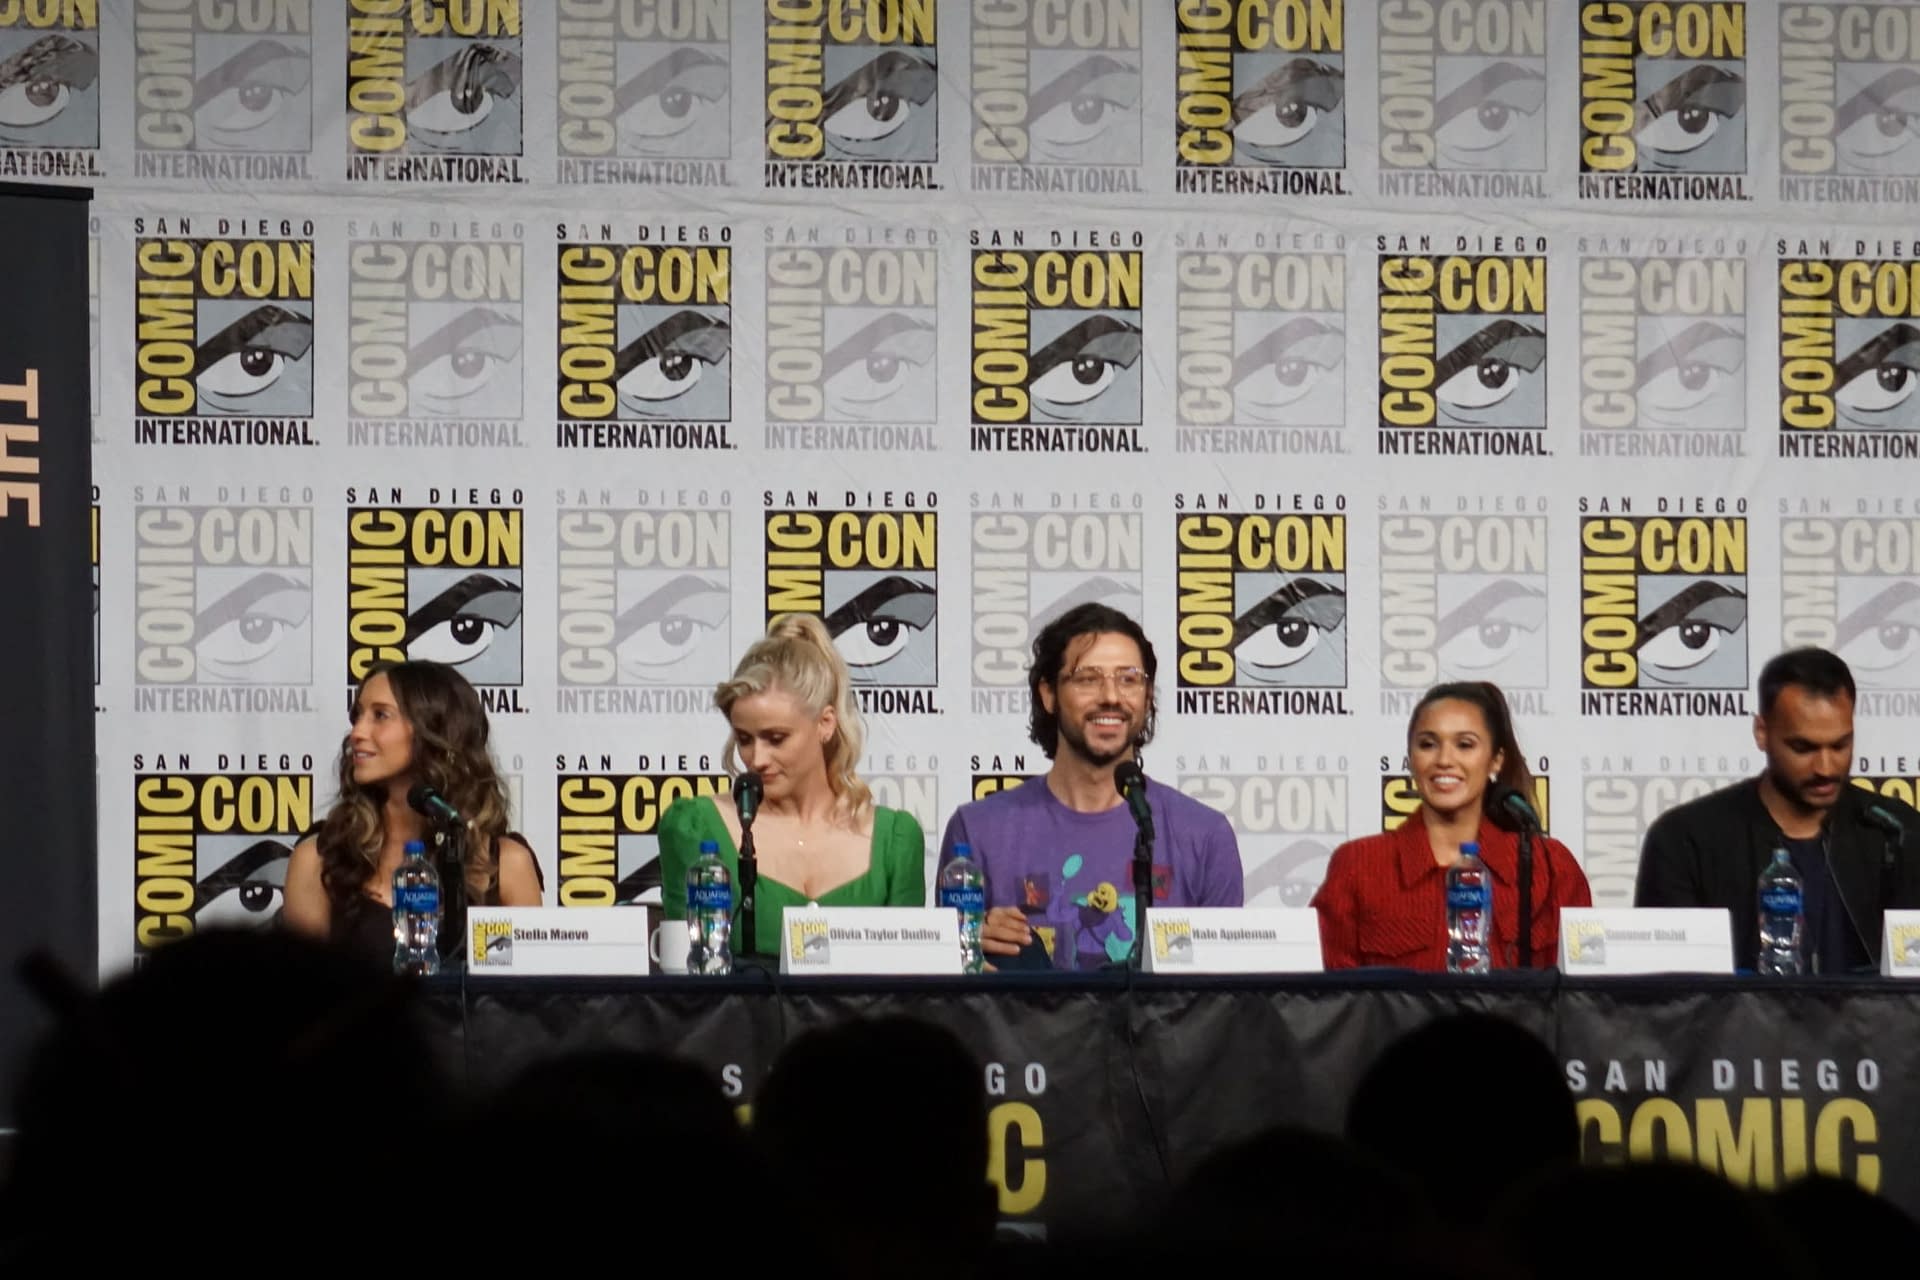 The Magicians SDCC 2019 Panel - With Some MST3K Commentary Thrown In